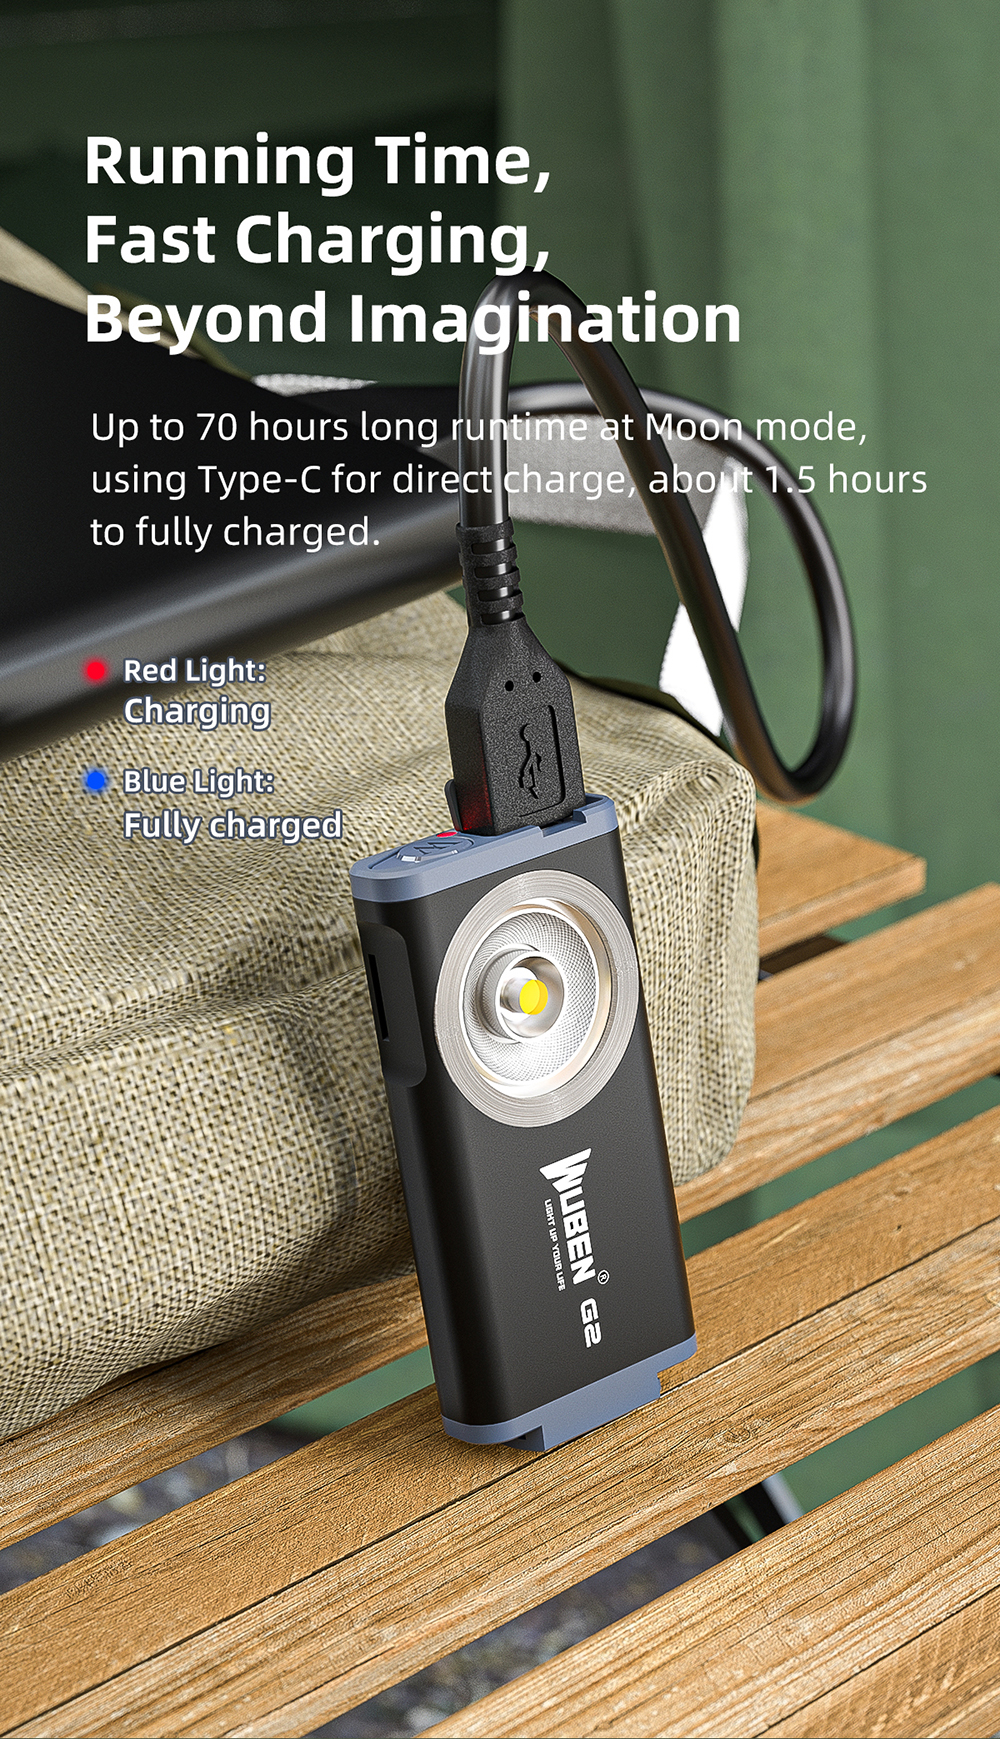 WUBEN G2 P9 500LM Quick-release EDC LED Keychain Flashlight Magnetic Tail Type-C Charging Super Wide-angle Floodlight Keychain Lamp Work Light With Back Clip